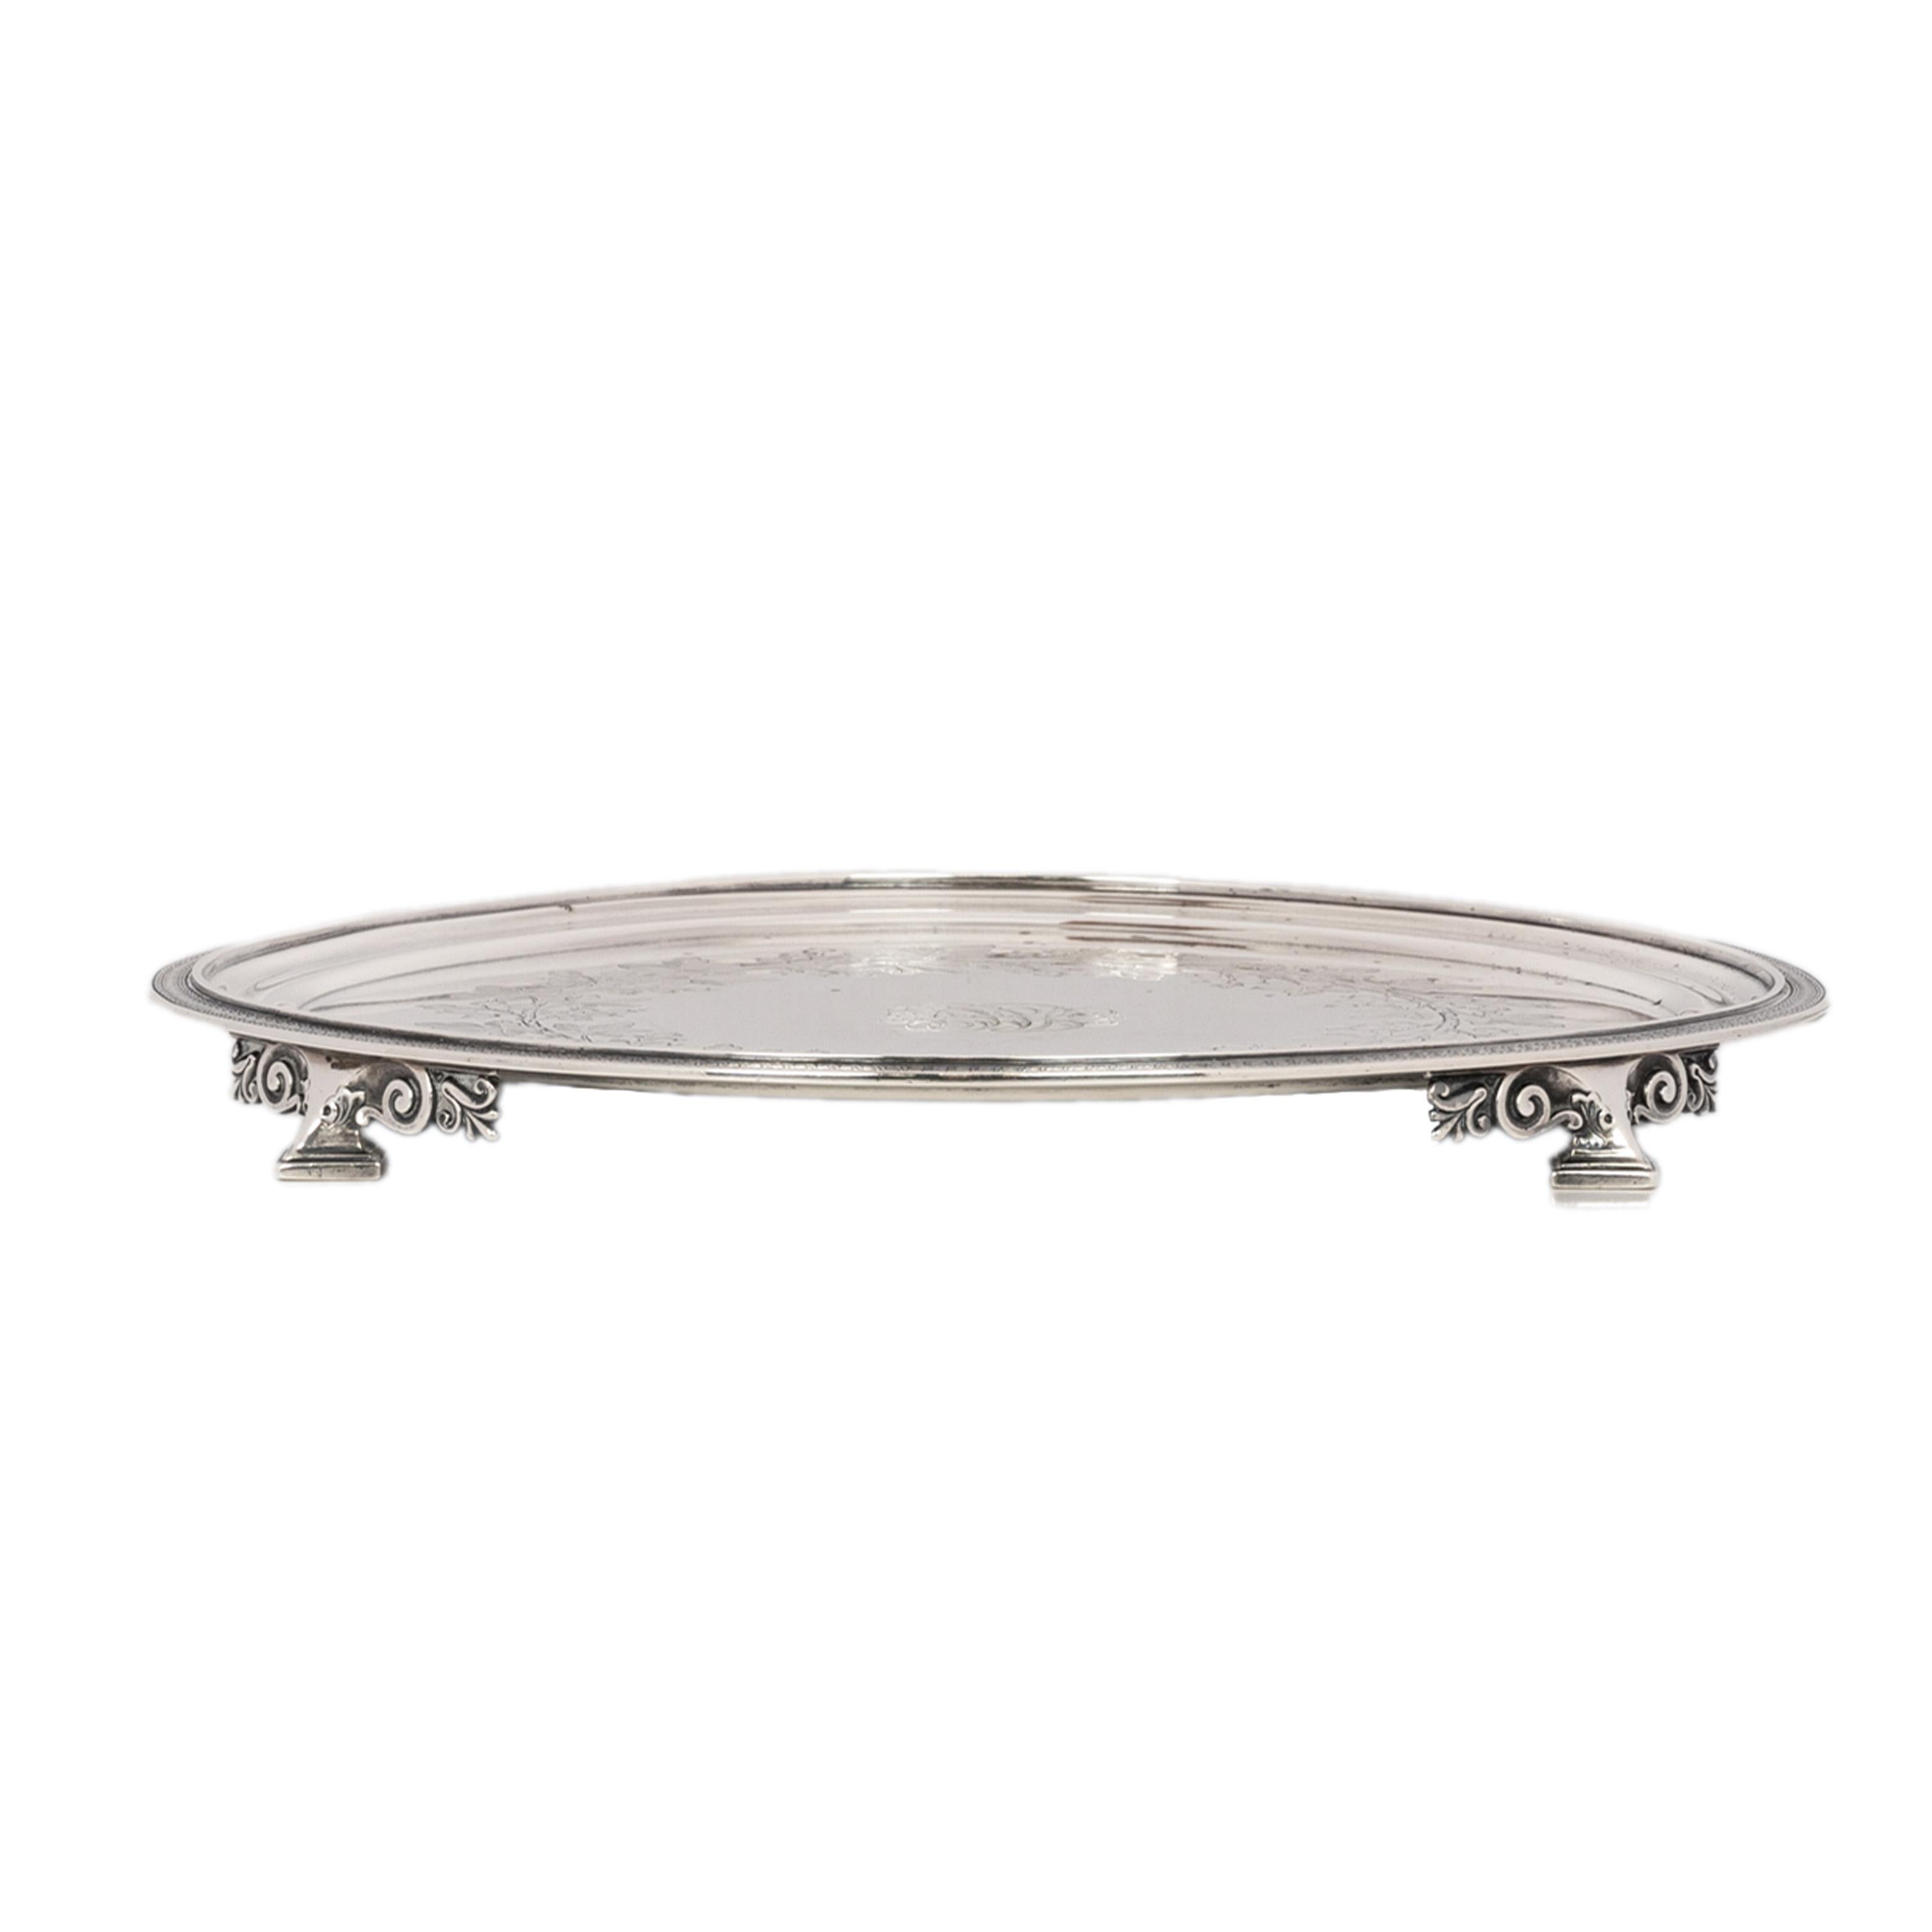 Fin du XIXe siècle Antique Sterling Silver Graved Tiffany & Co Footed Salver Tray New York 1870 en vente